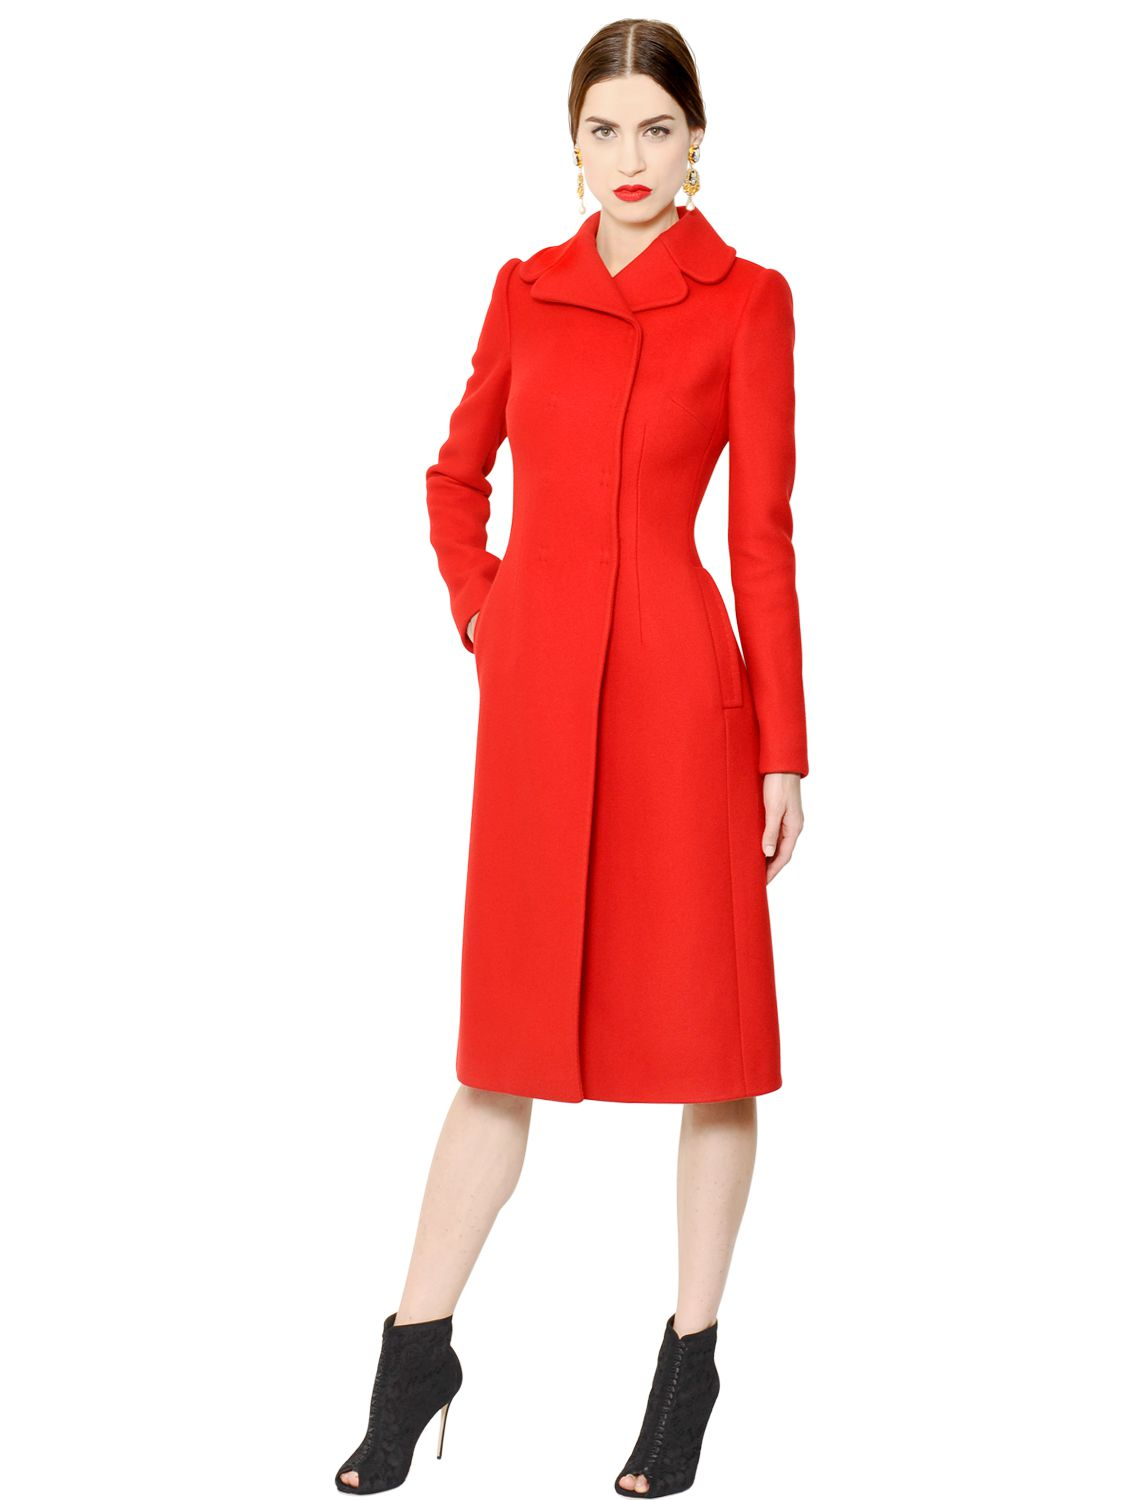 Dolce & gabbana Wool & Cashmere Coat in Red | Lyst